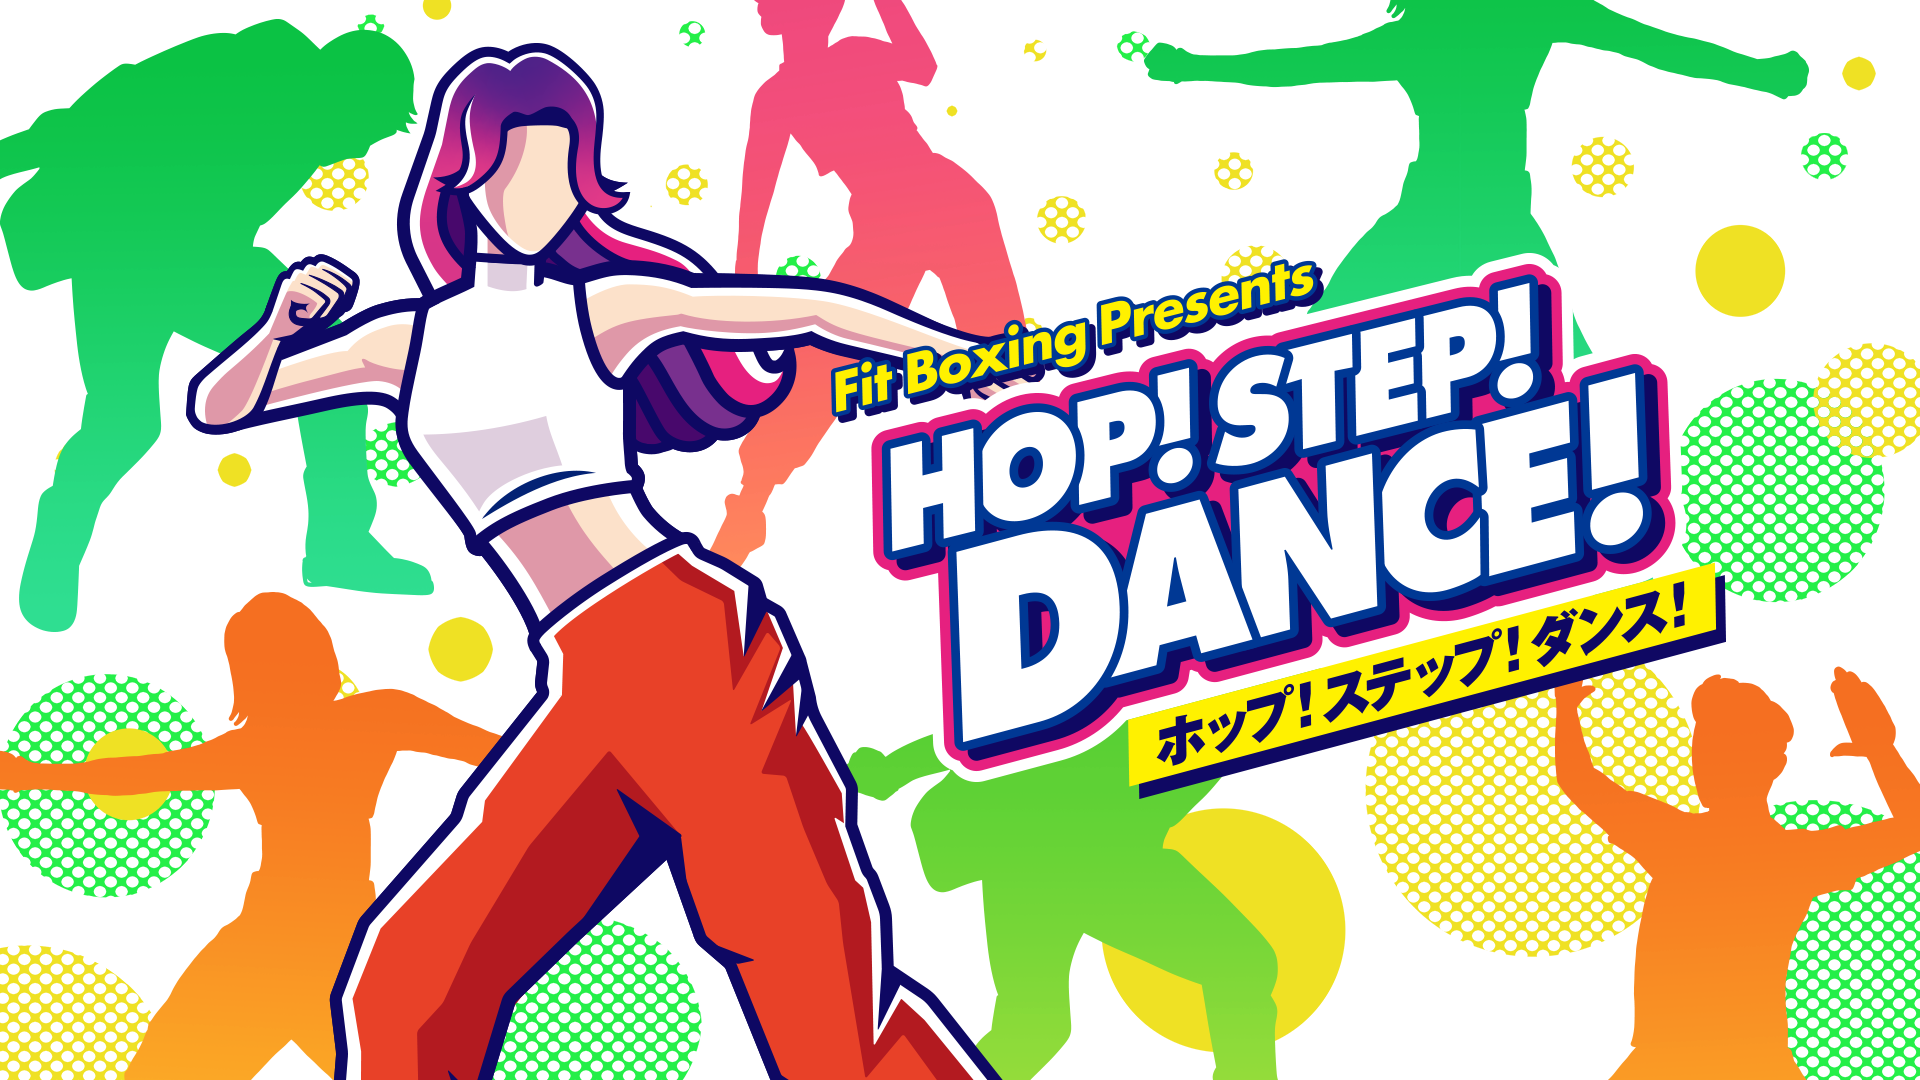 Nintendo Switch ソフトFit Boxing Presents「HOP! STEP! DANCE!」発売決定のお知らせ1